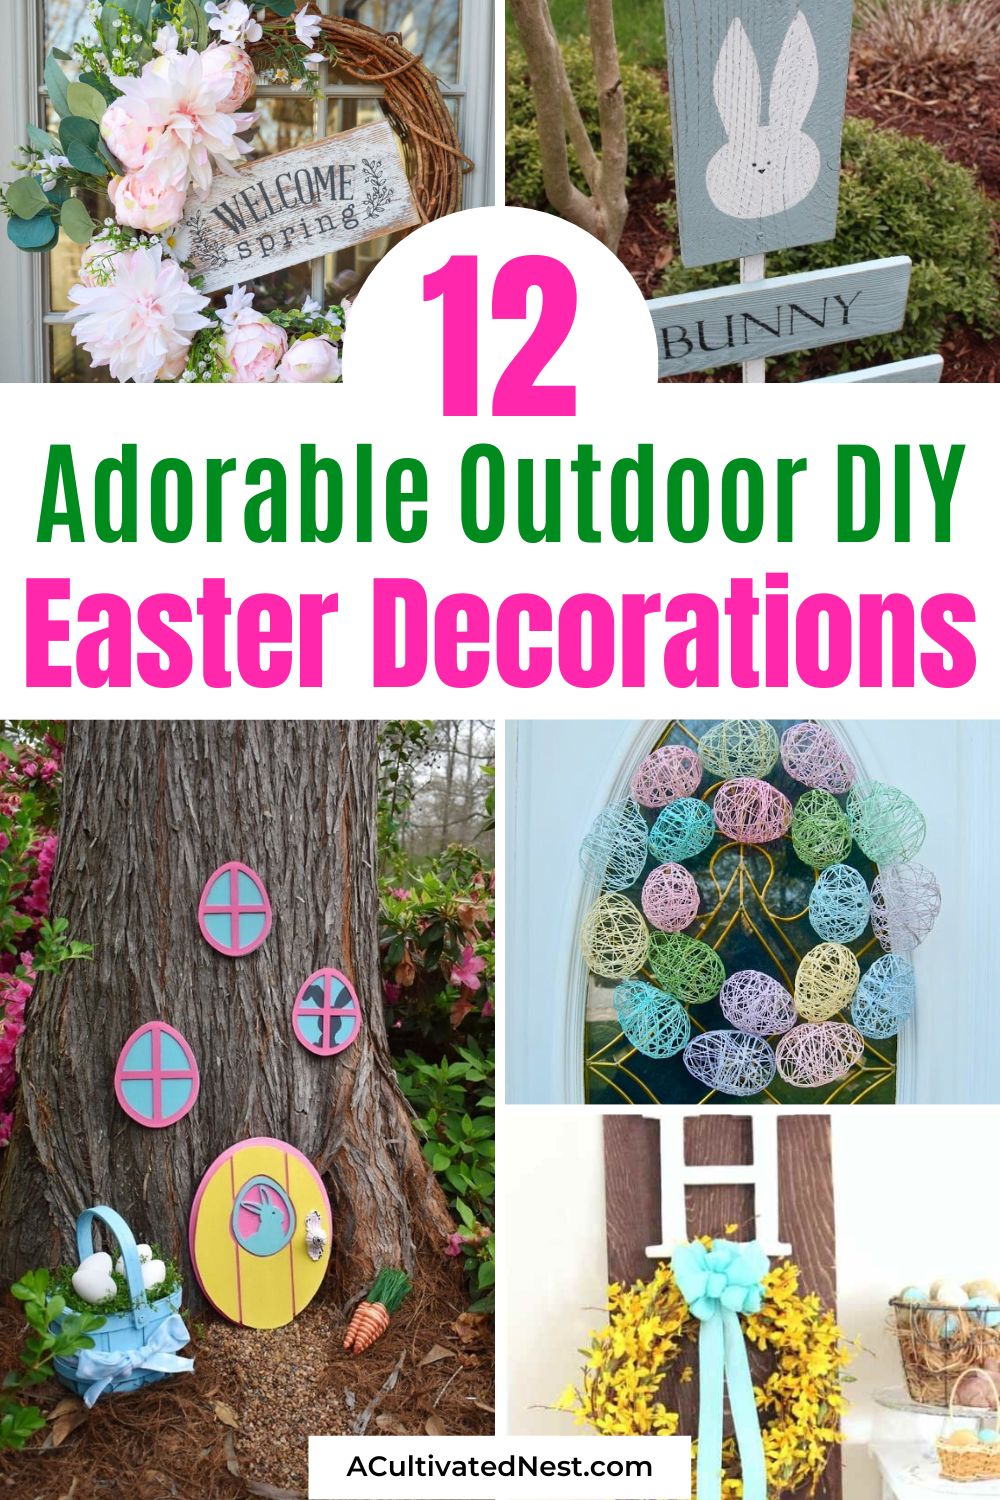 12 Gorgeous Outdoor Easter Decoration DIYs- Ready to transform your garden into a wonderland this Easter? Dive into our roundup of gorgeous outdoor Easter decoration DIYs! Whether you're looking to craft festive wreaths, enchanting topiaries, or delightful egg displays, we've got you covered. | #EasterDIY #DIYDecor #crafts #diyProjects #ACultivatedNest